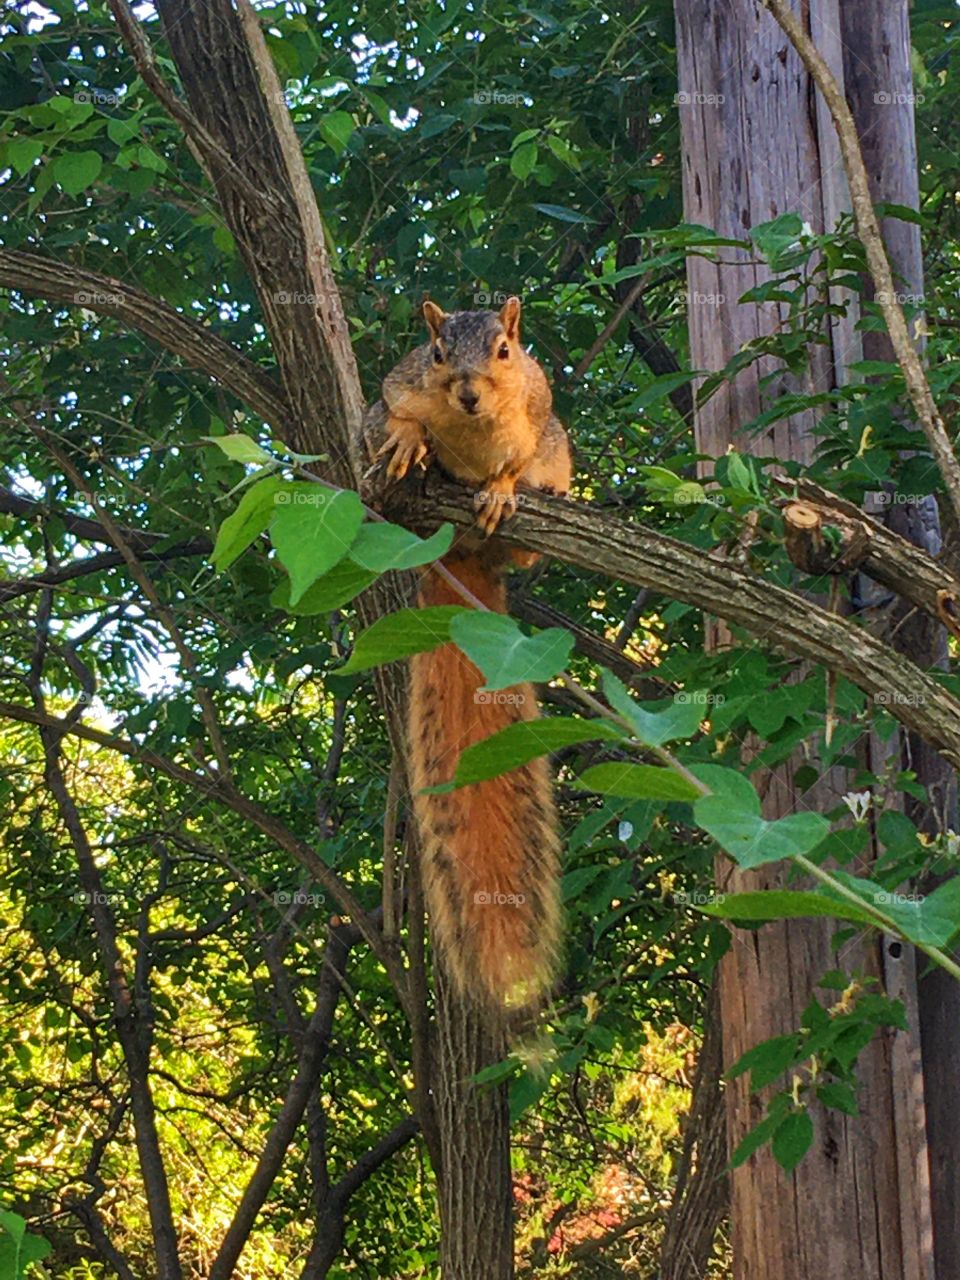 My Forest Friend The Spying Squirrel 